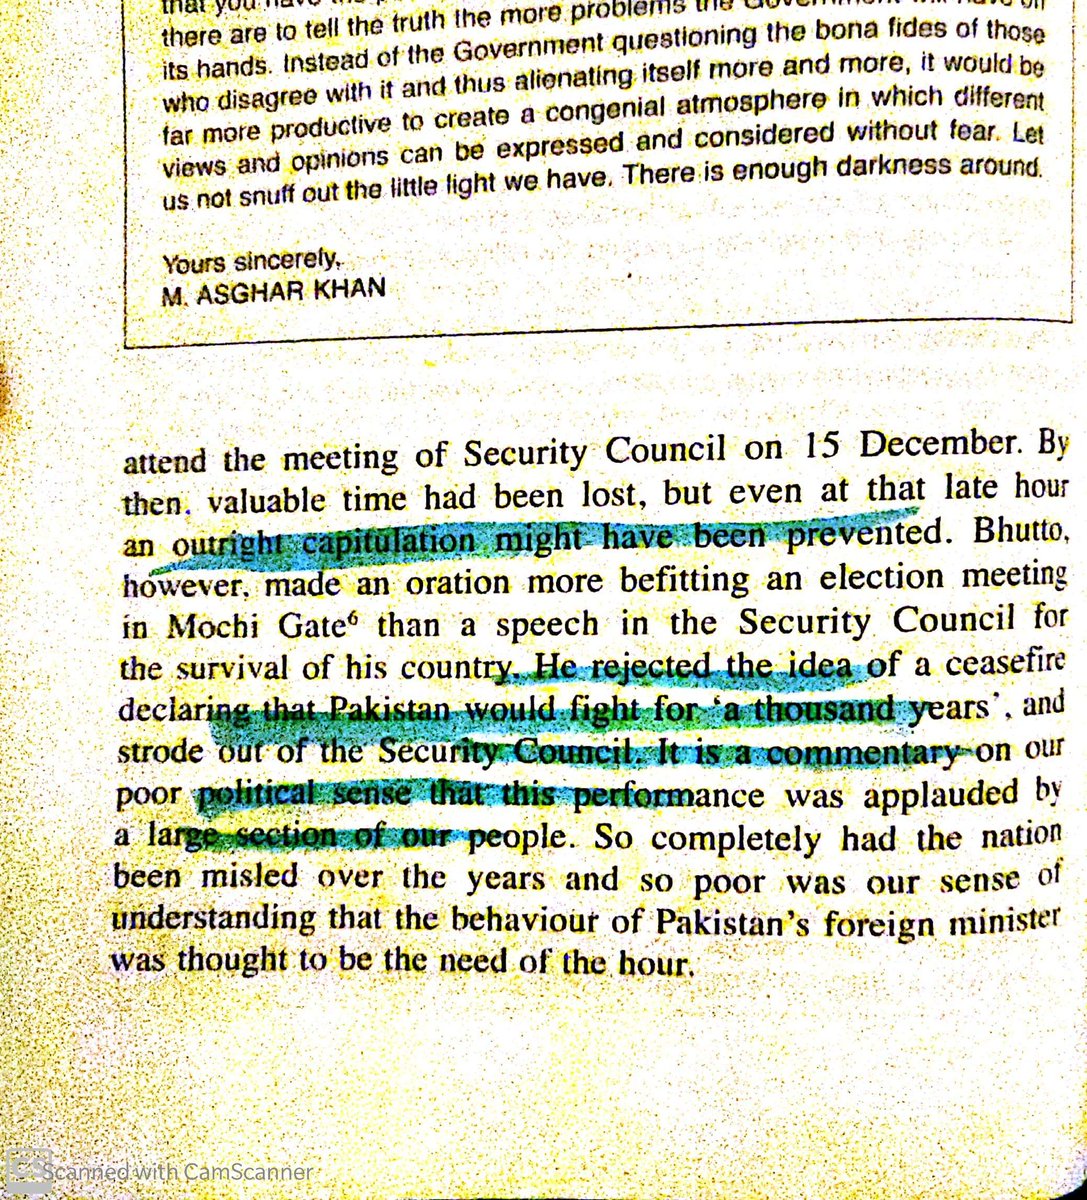 Still, outright capitulation might have been prevented, but Bhutto instead made an oration more befitting an election meeting in Mochi Gate than a speech in the security council.Bhutto speech became very famous.